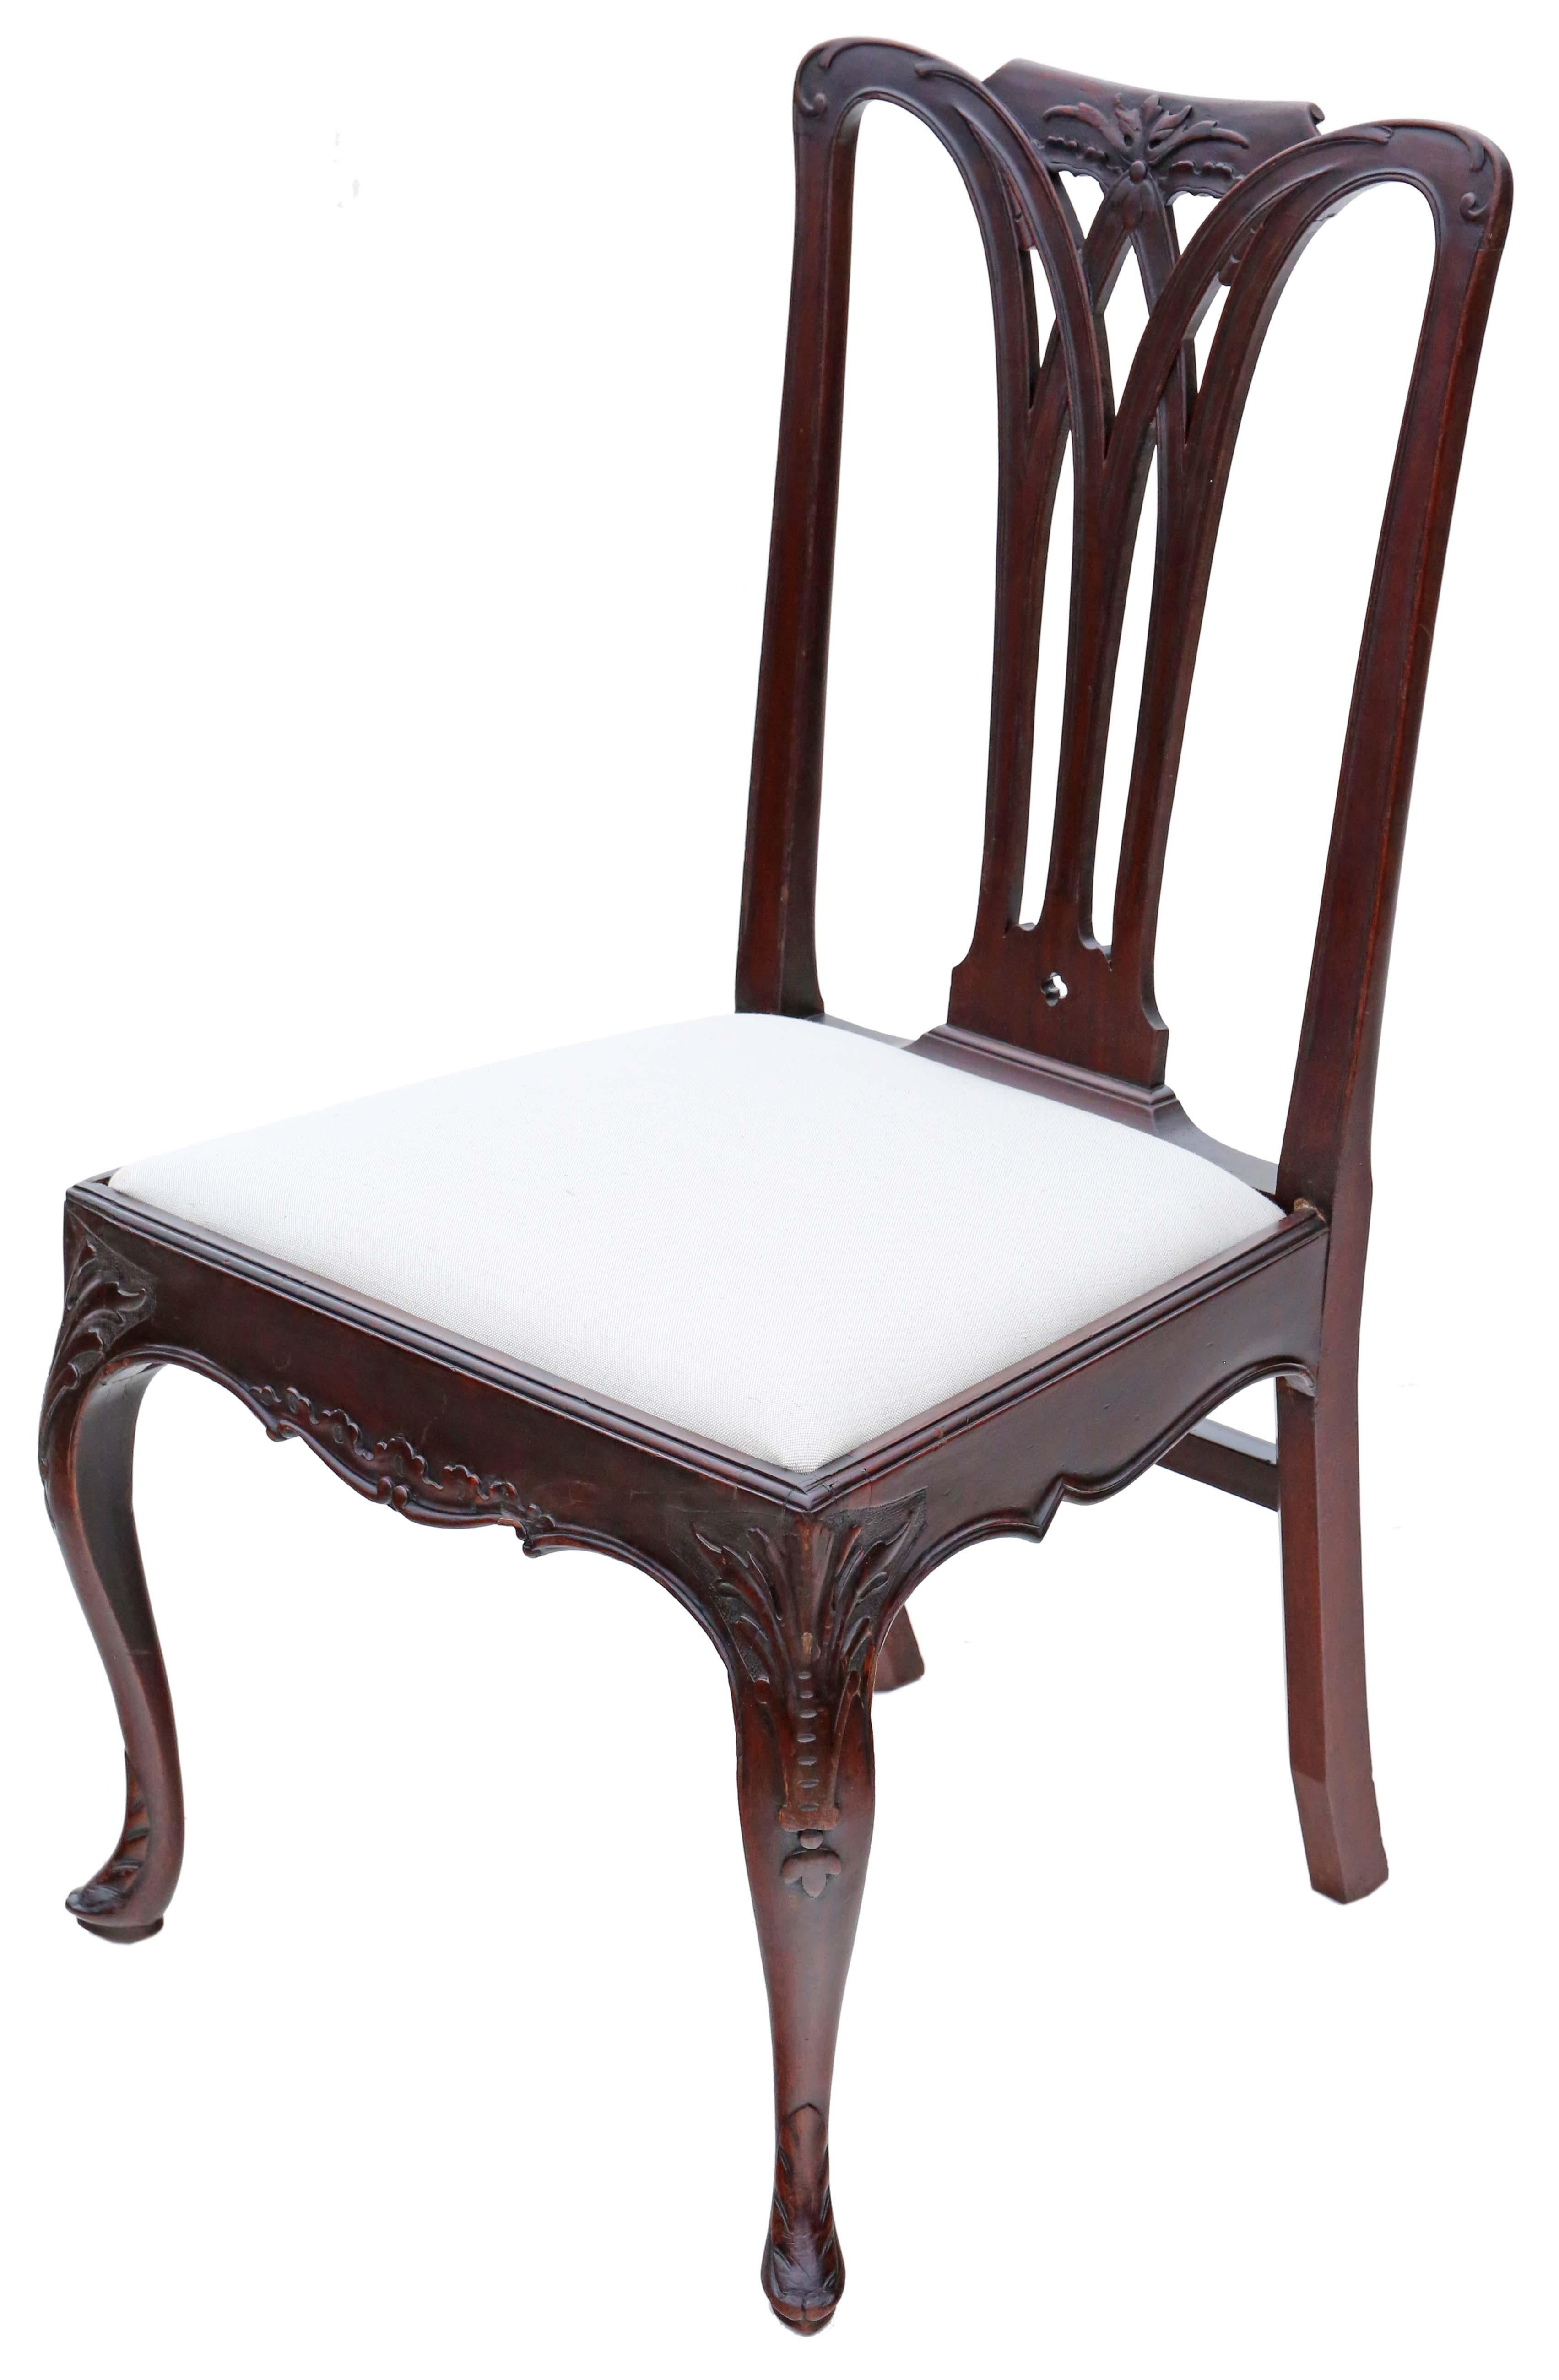 Antique 18th Century Georgian Mahogany Dining Chairs: Set of 10, High Quality In Good Condition For Sale In Wisbech, Cambridgeshire